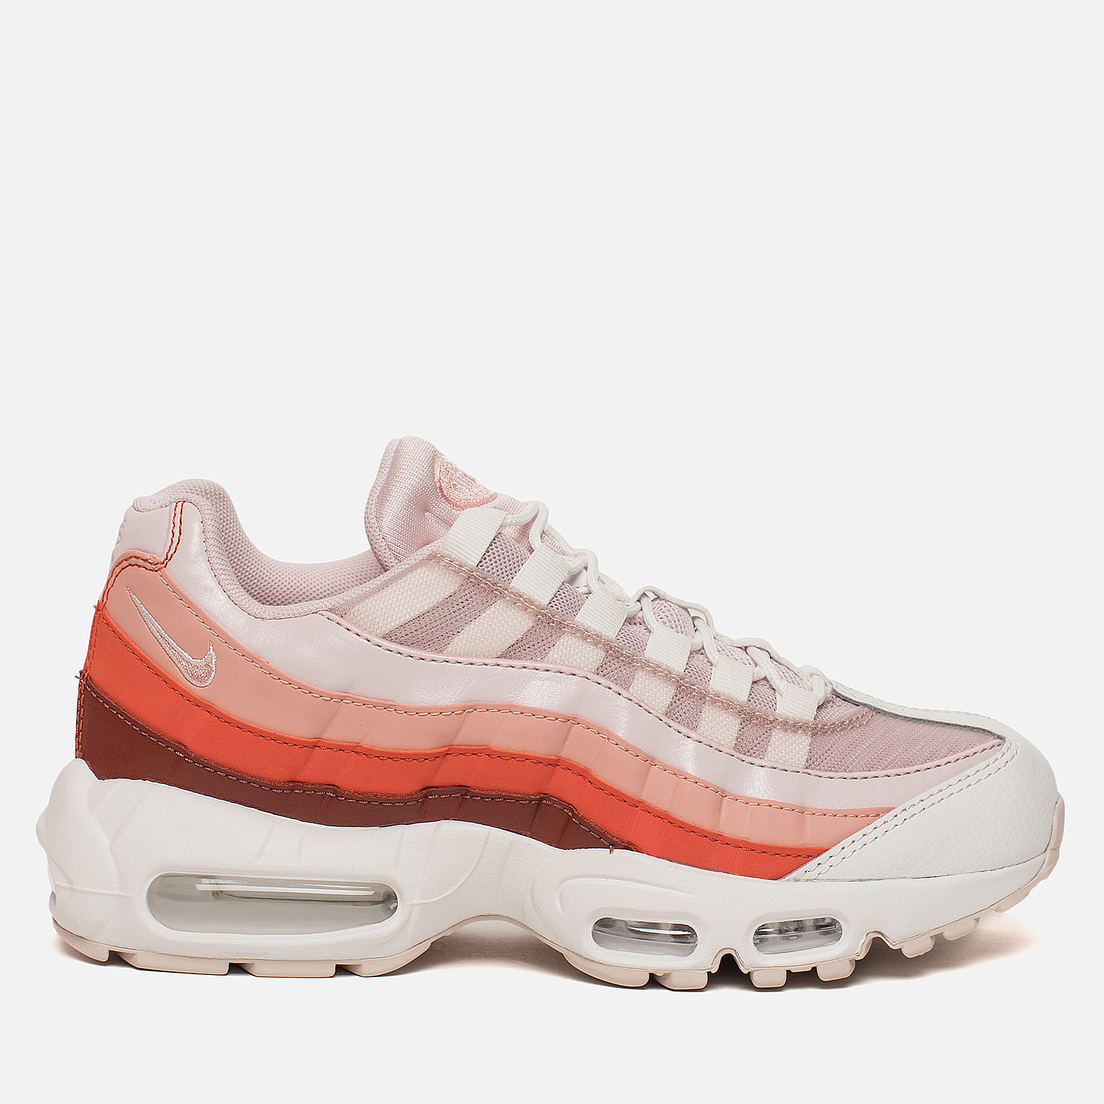 Nike Женские кроссовки Air Max 95 Barely